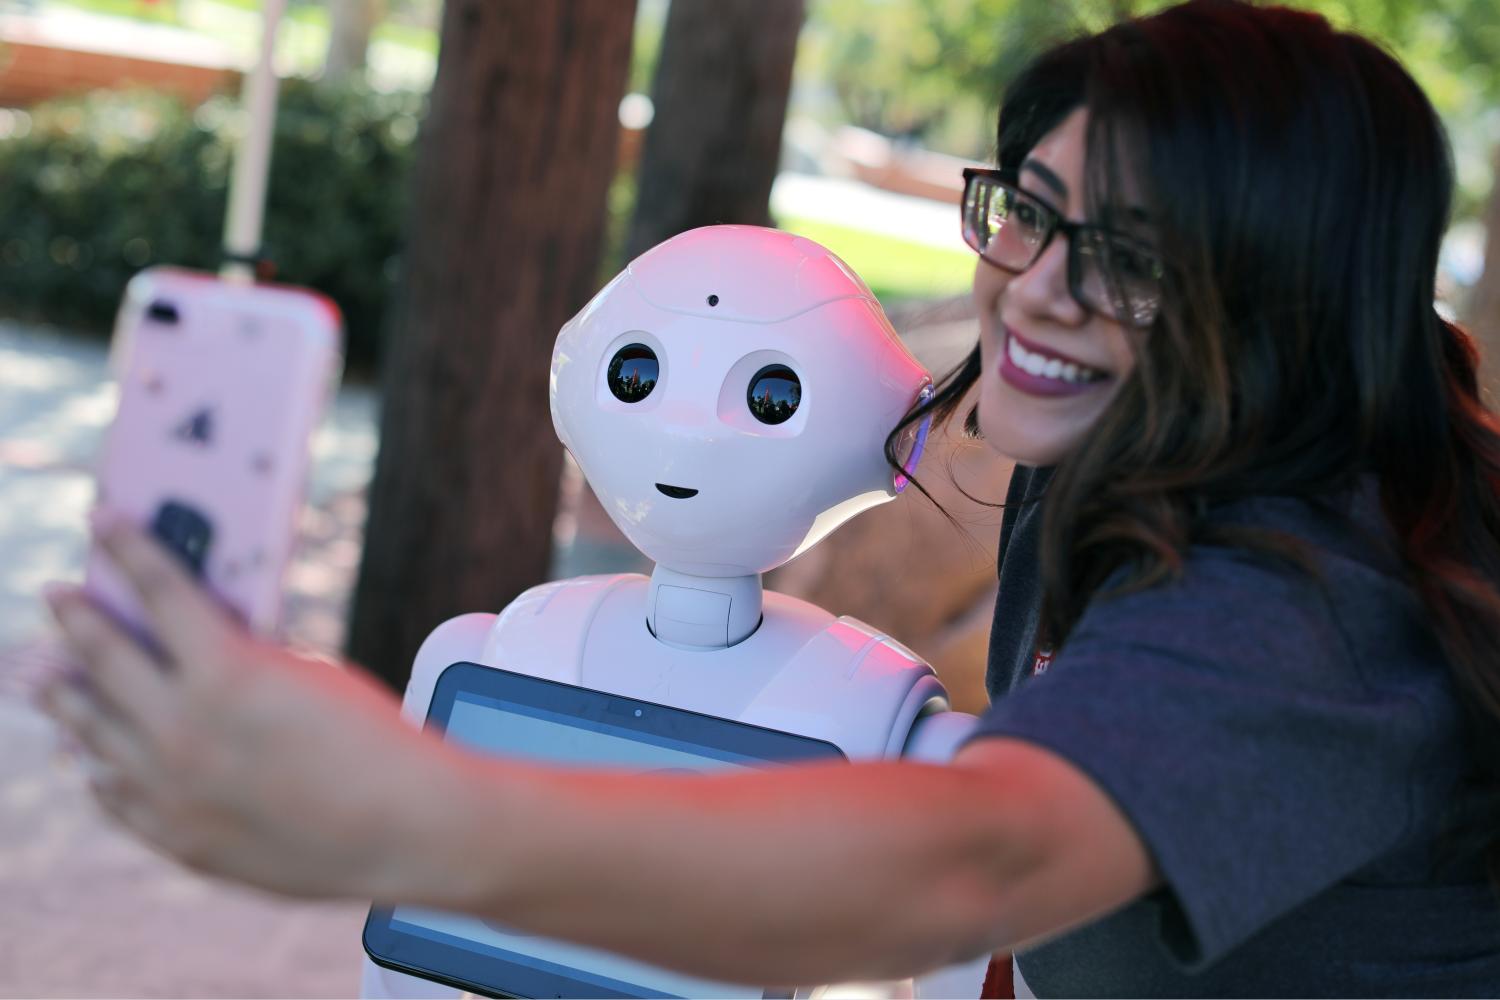 San Marcos student Amaris Gonzalez takes a selfie with "Pepper" an artificial Intelligence project utilizing a humanoid robot from French company Aldebaran and reprogramed as an assistant for students attending Palomar College in San Marcos, California, U.S. October 10, 2017. REUTERS/Mike Blake